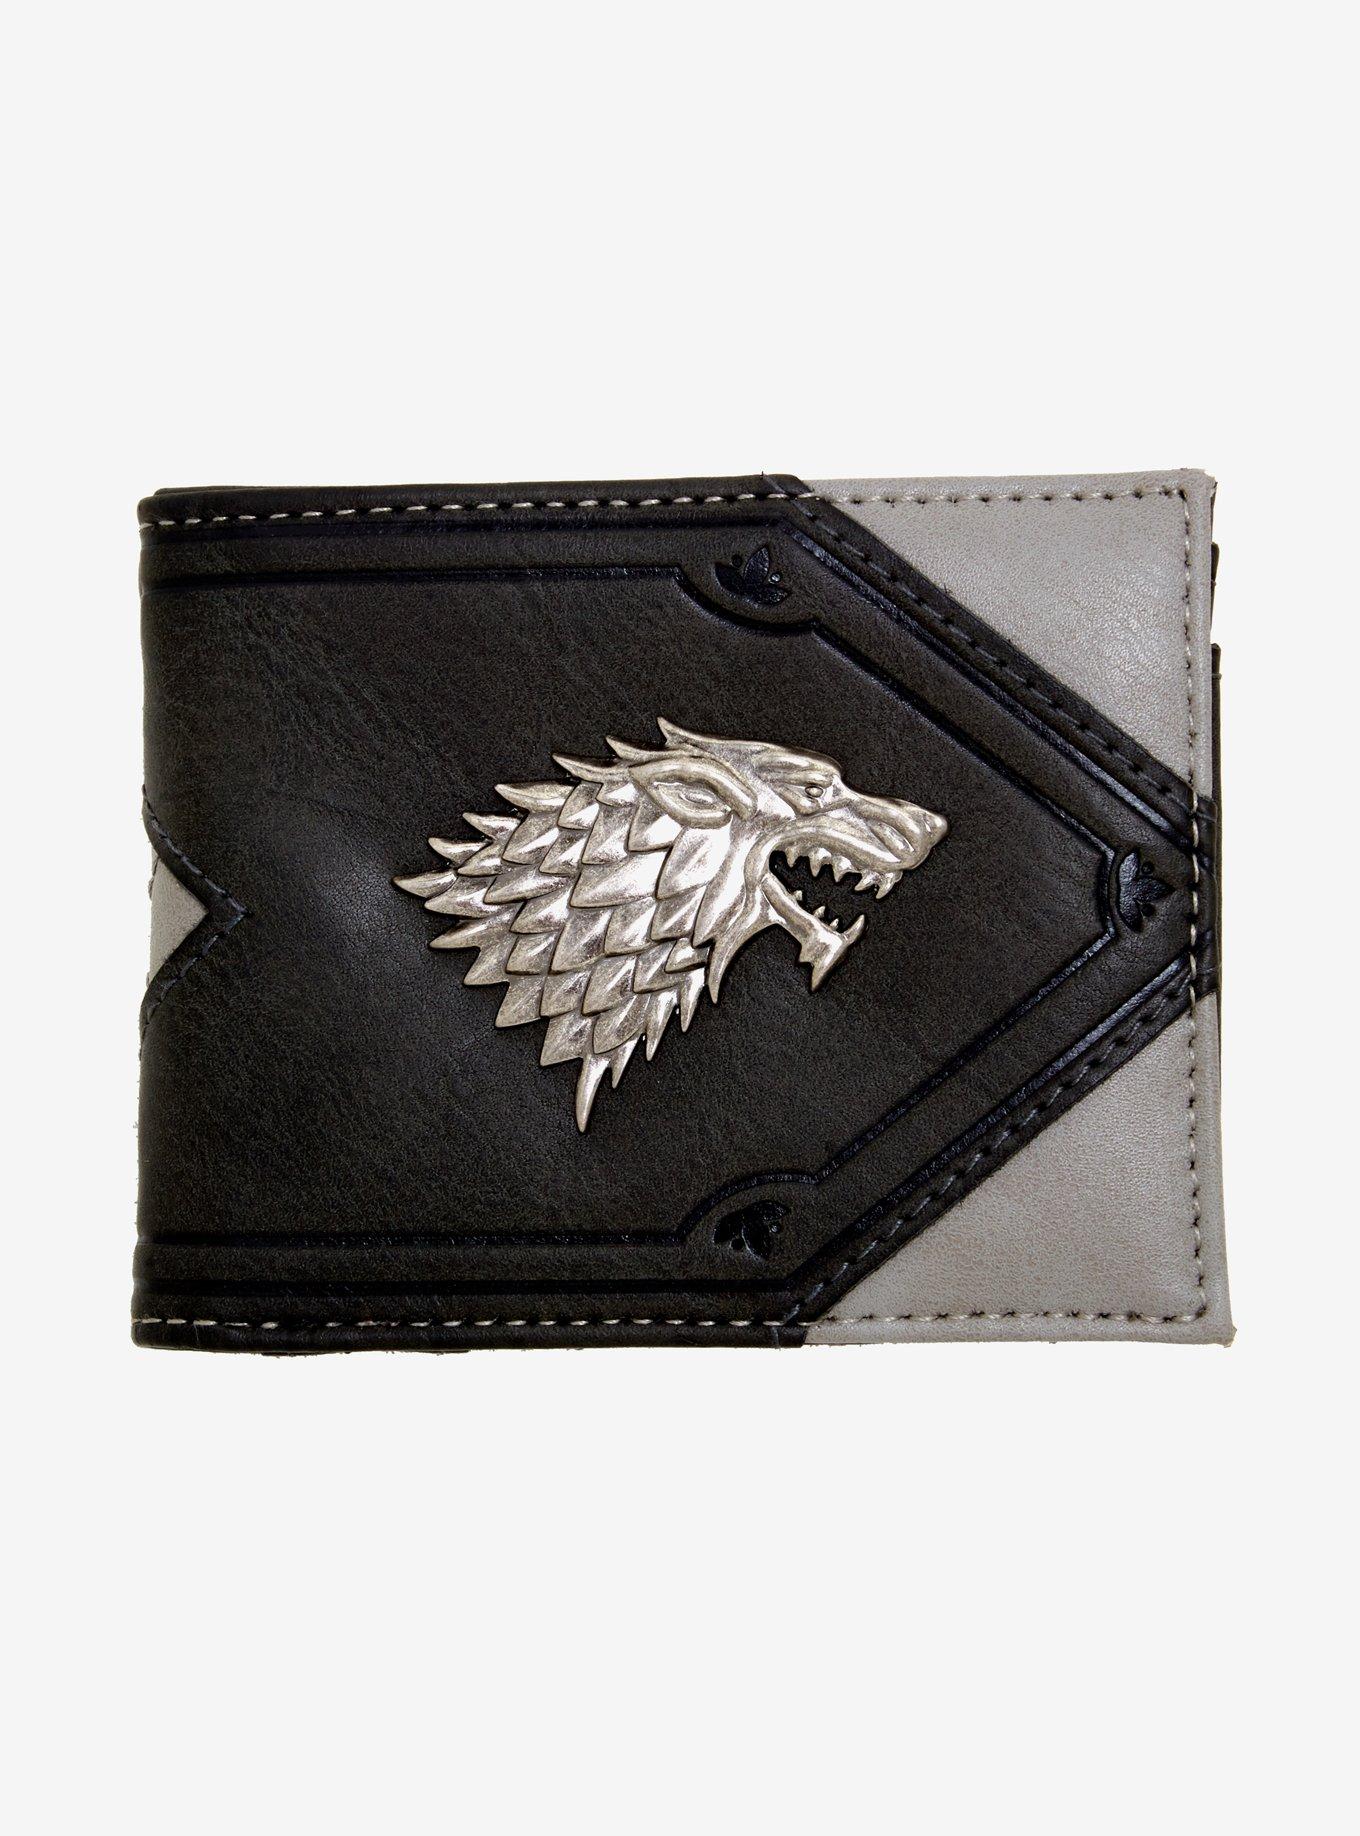 METAL STARK LOGO STUDS BLACK CLUTCH COIN PURSE NEW OFFICIAL GAME OF THRONES 